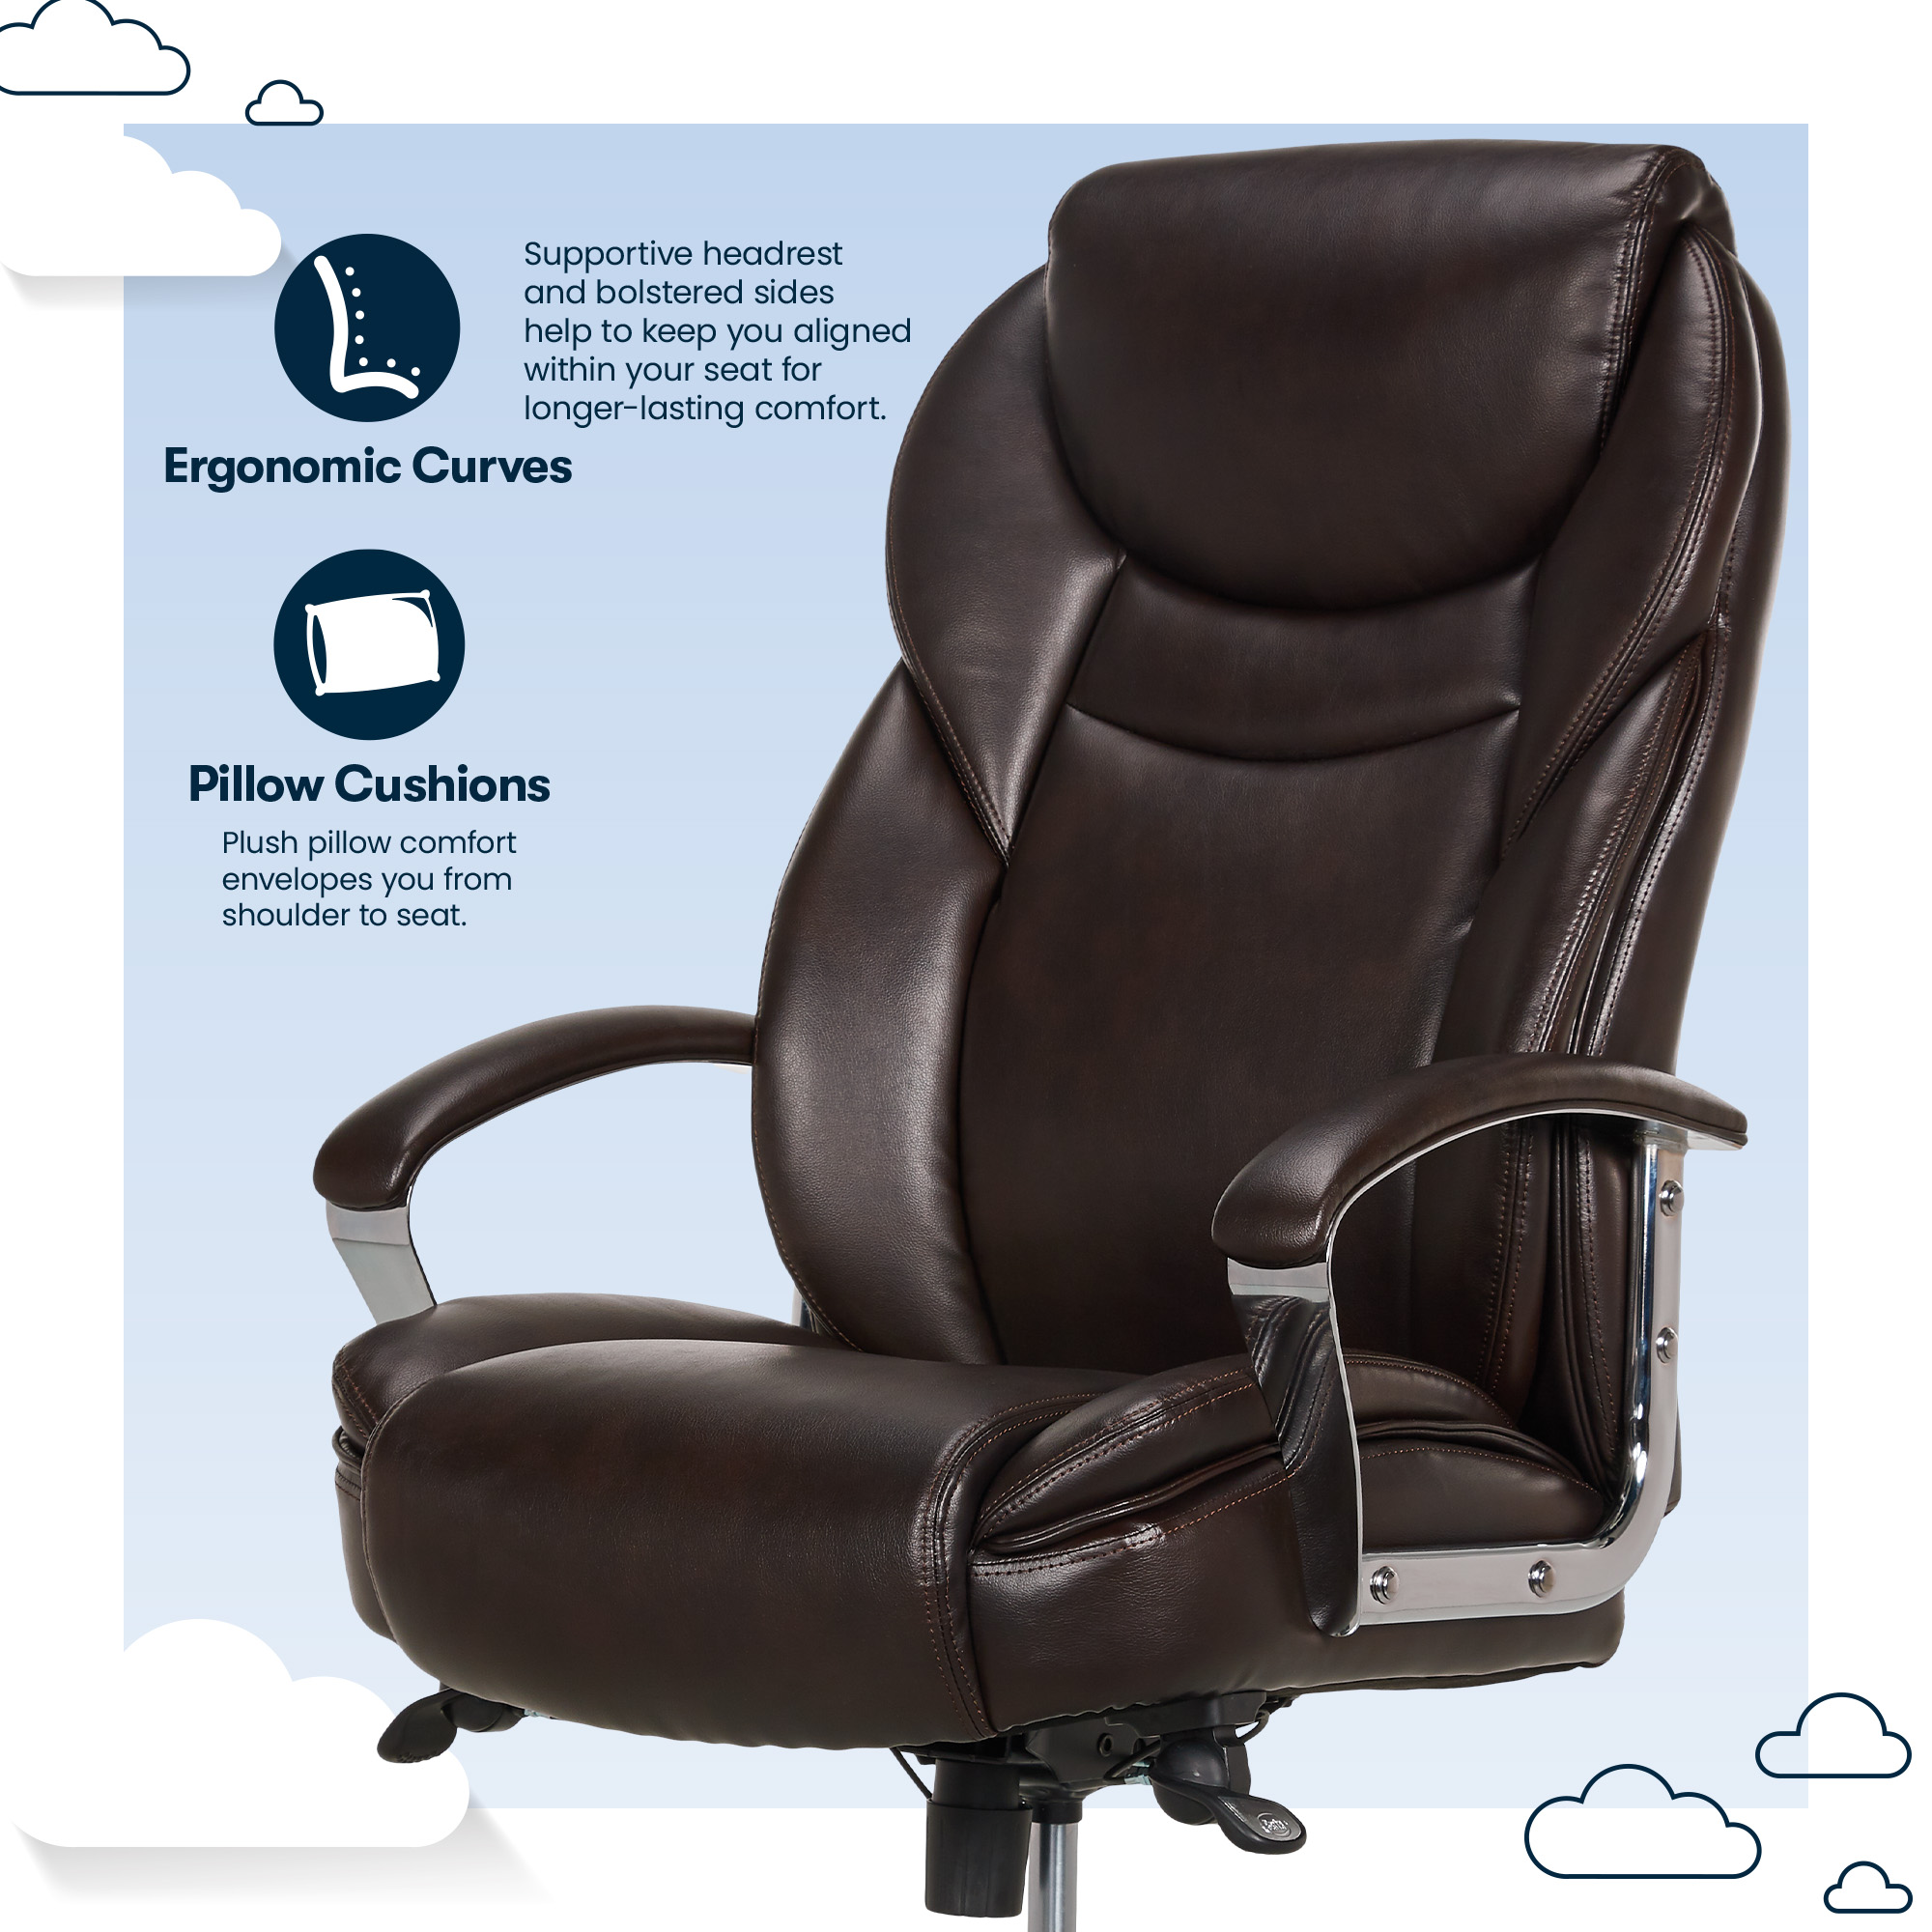 Serta Big & Tall High Back Office Chair, Heavy Duty Weight Rating, Brown Bonded Leather Upholstery - image 4 of 14